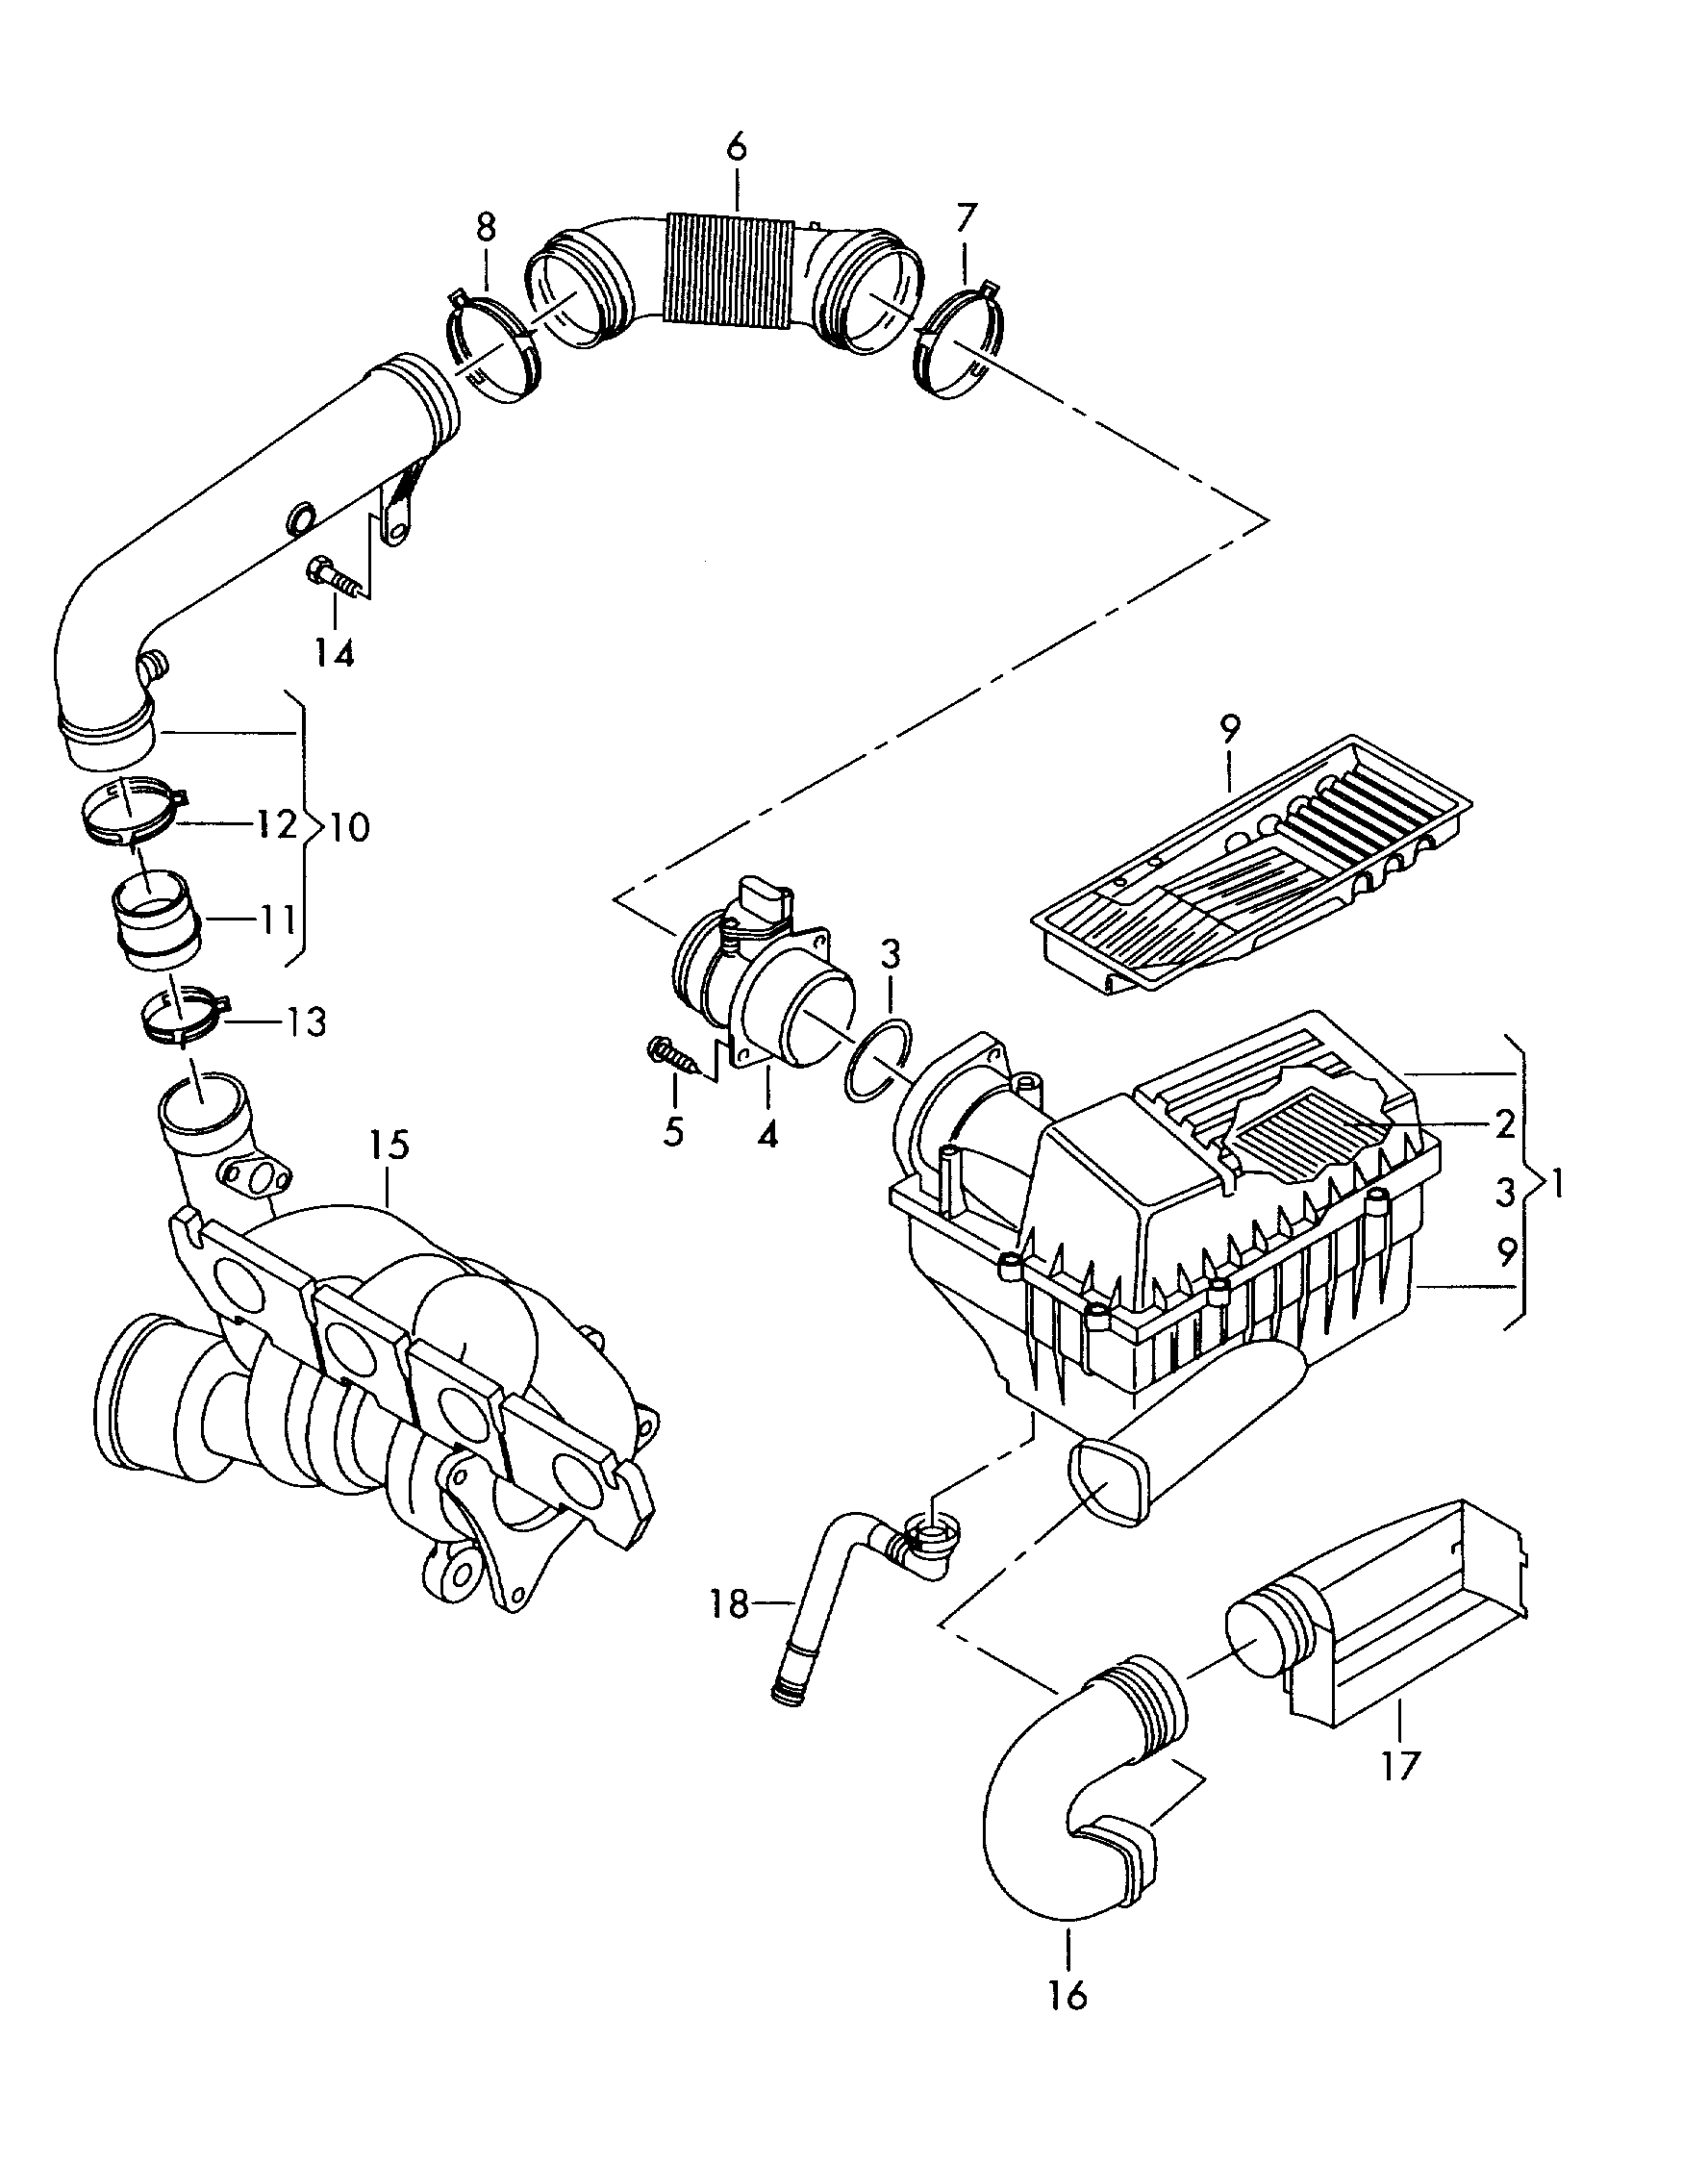 Air filter with connecting<br>parts 2.0 Ltr. - Scirocco - sci